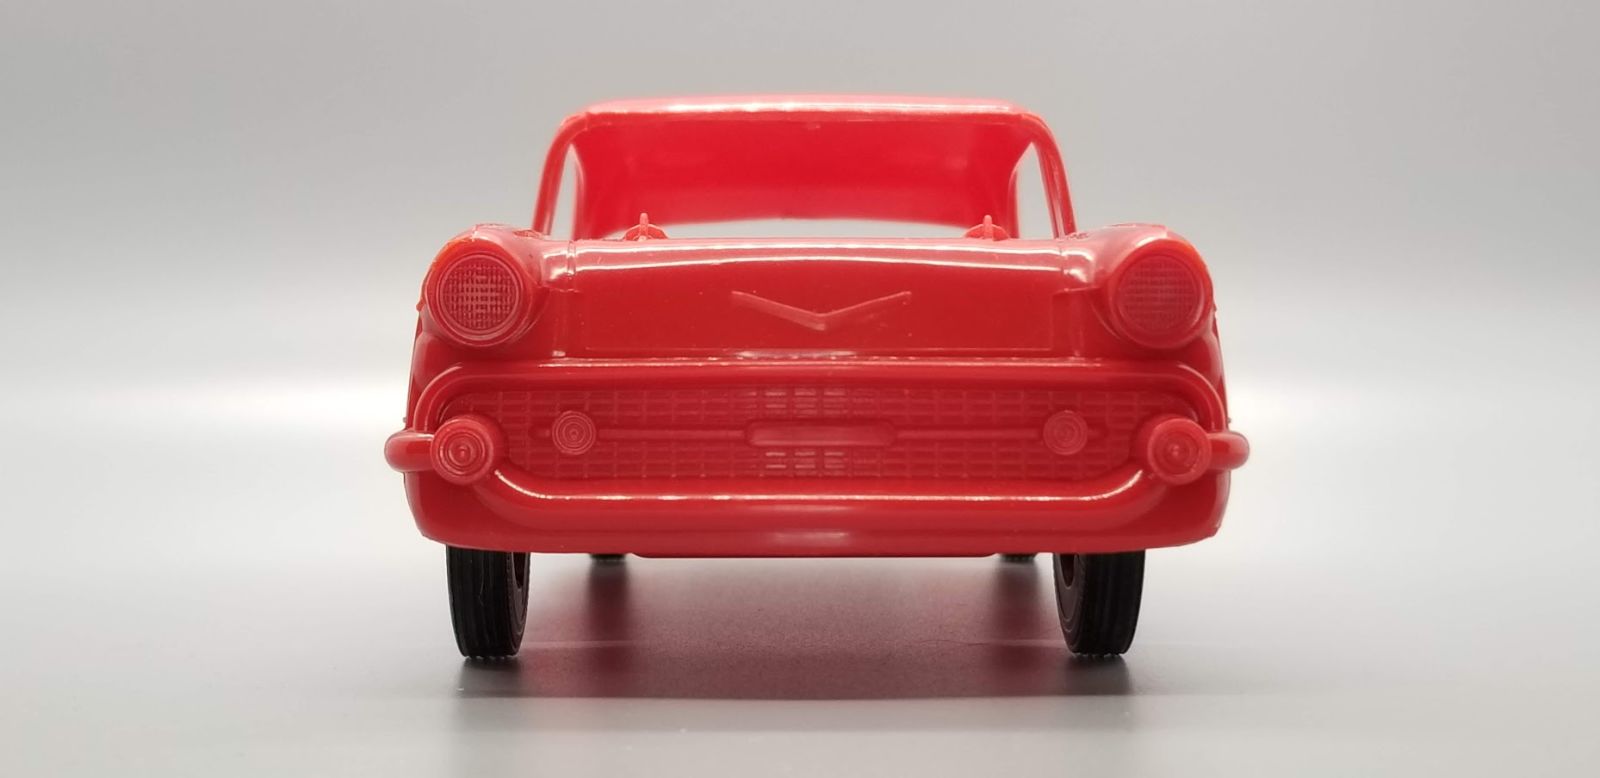 Illustration for article titled 1/24: 1957 Chevy 4-door Hard Top